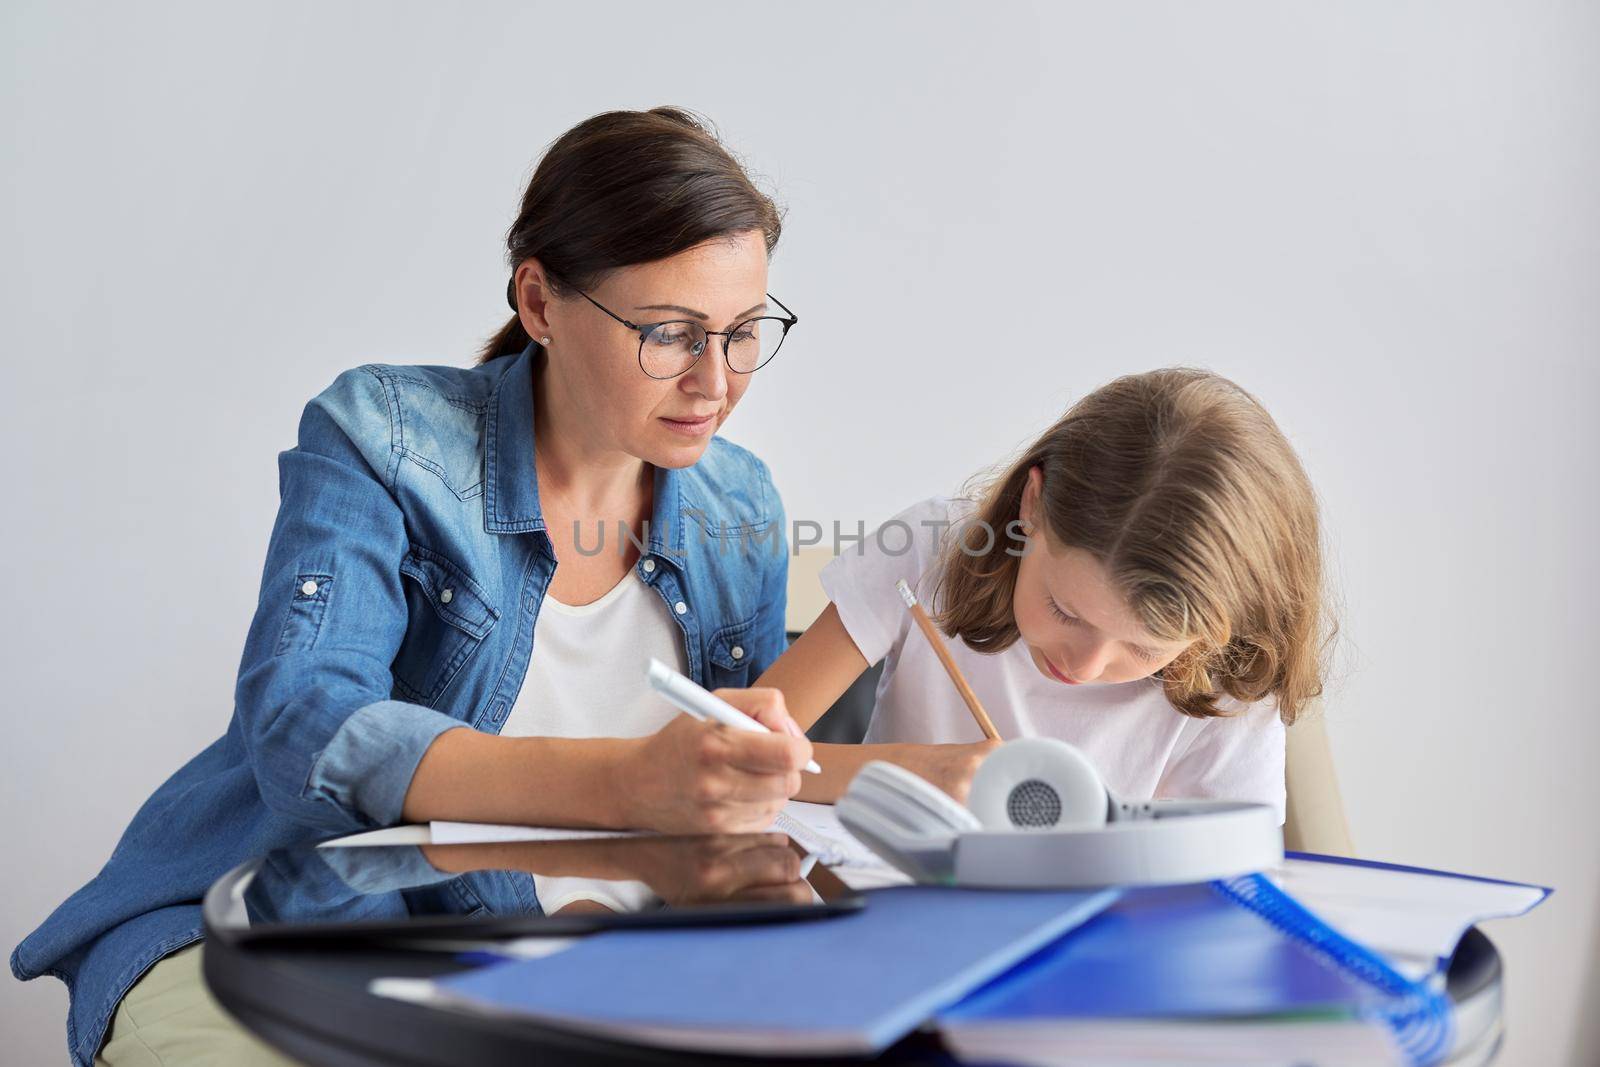 Mom and daughter student learning school lessons together at home by VH-studio